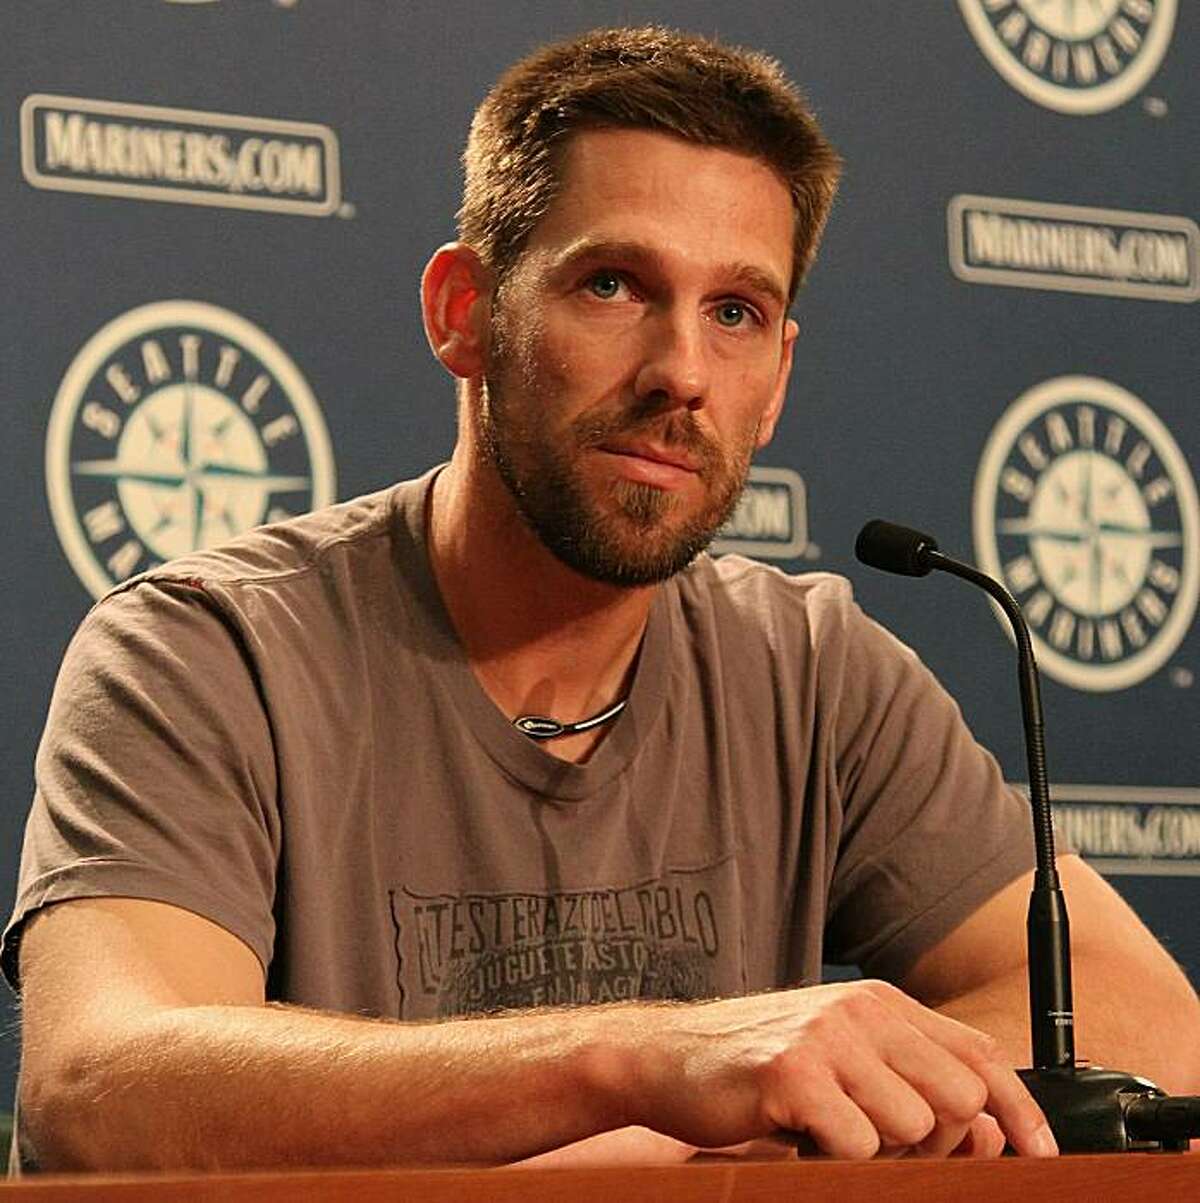 SEATTLE - JULY 09: Cliff Lee of the Seattle Mariners speaks at a press conference announcing his trade to the Texas Rangers for first baseman Justin Smoak, pitcher Blake Beavan, Double-A Frisco reliever Josh Lueke and second baseman Matt Lawson at SafecoField on July 9, 2010 in Seattle, Washington.